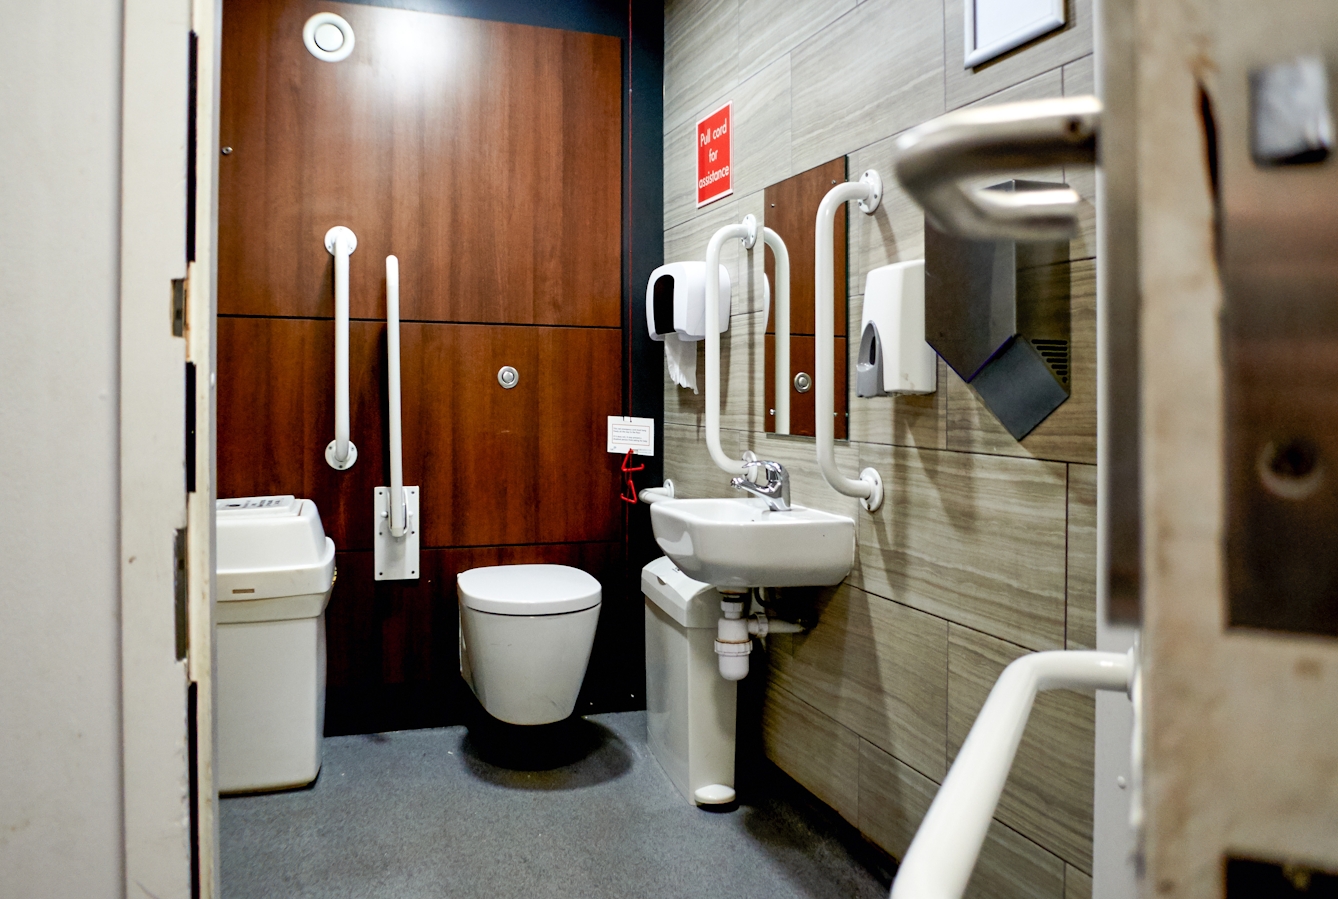 Photograph though the doorway of an accessible toilet showing part of the door and doorframe, along with the contents of the room, toilet, basin and sanitary bins. One of the walls has a wood effect panels and the room has a slightly modern feel.